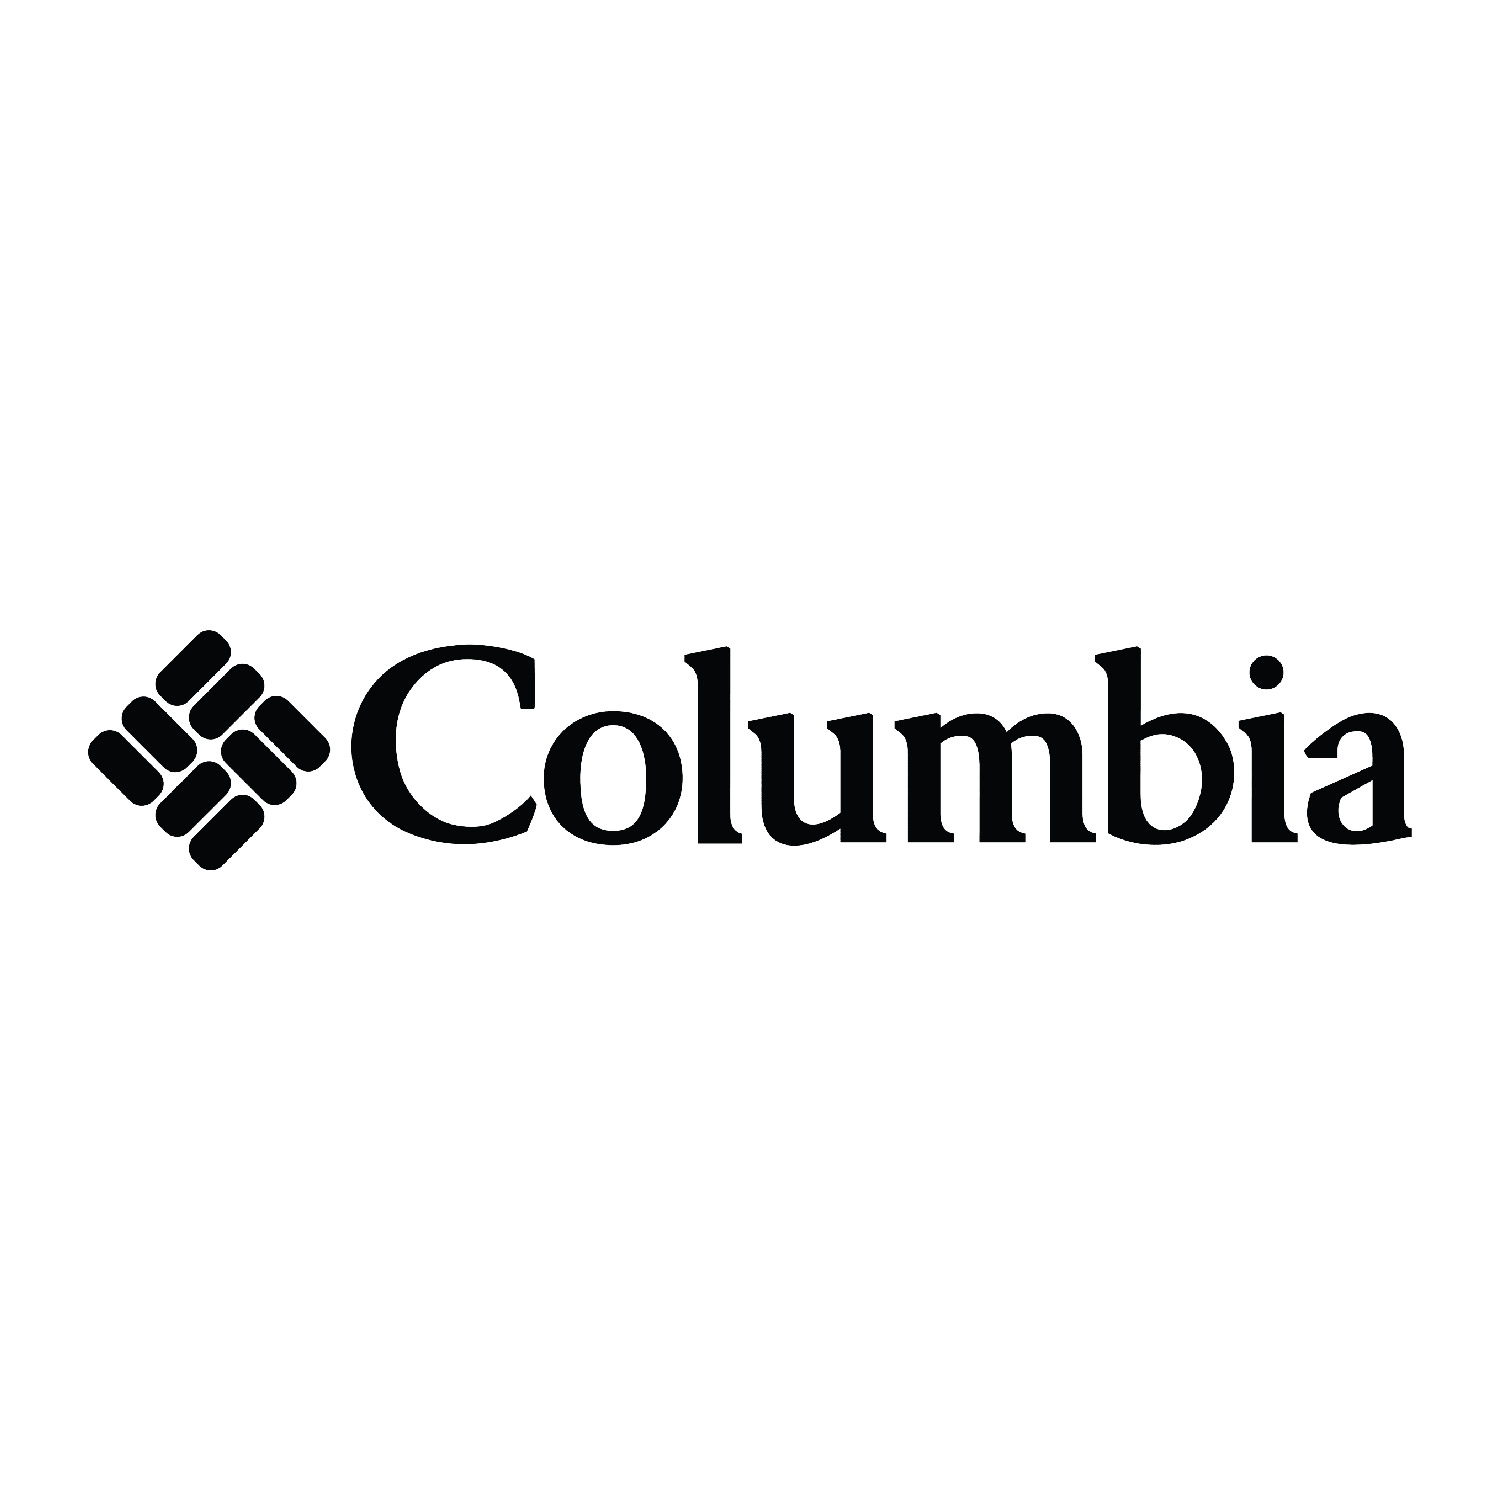 Columbia Branded Apparel